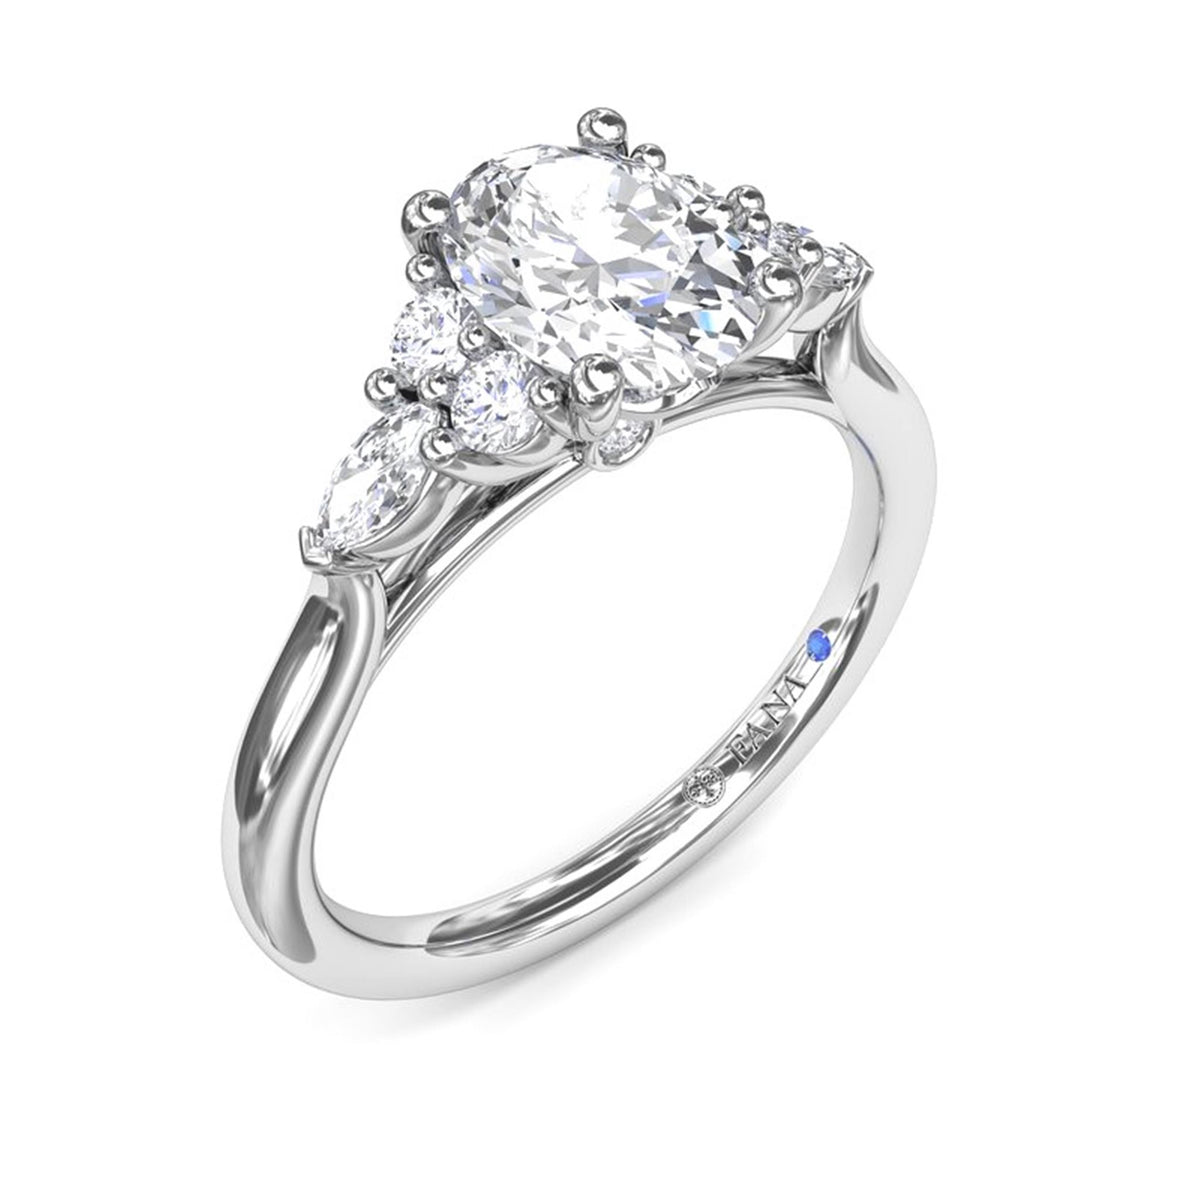 14Kt White Gold Classic Prong Engagement Ring Mounting With 0.42cttw Natural Diamonds